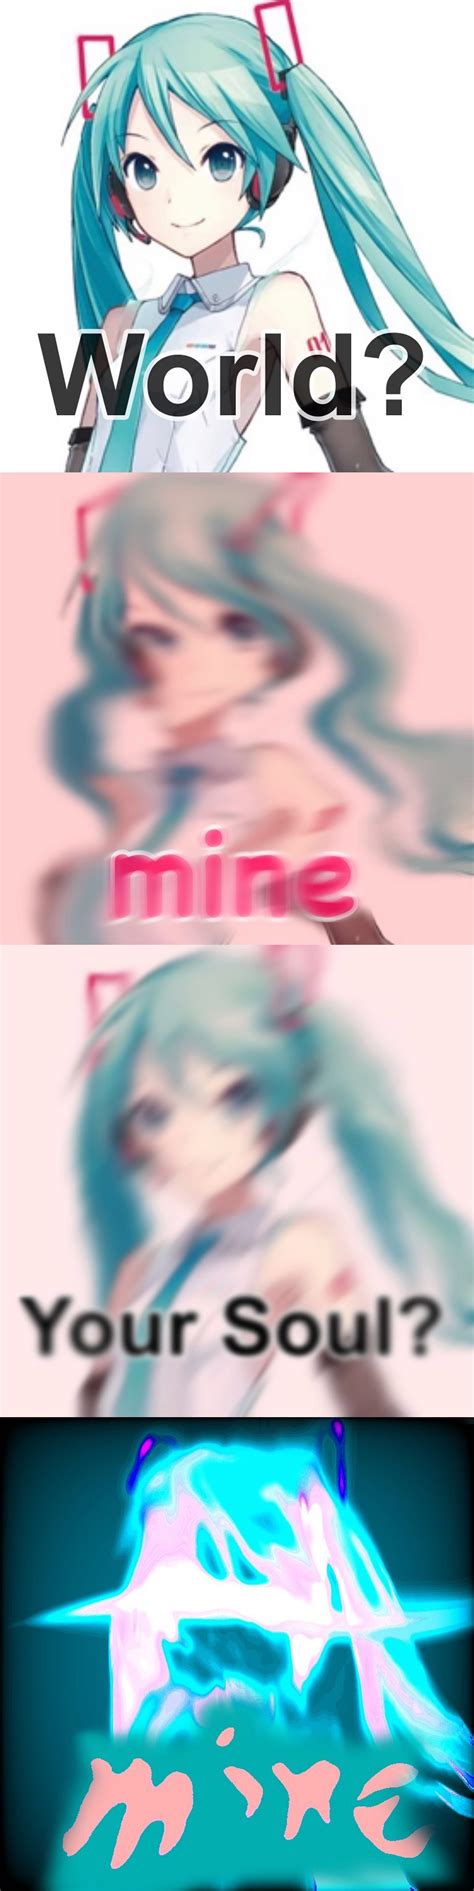 Vocaloid Funny Miku Hatsune Vocaloid Miku Chan Kaito Funny Images